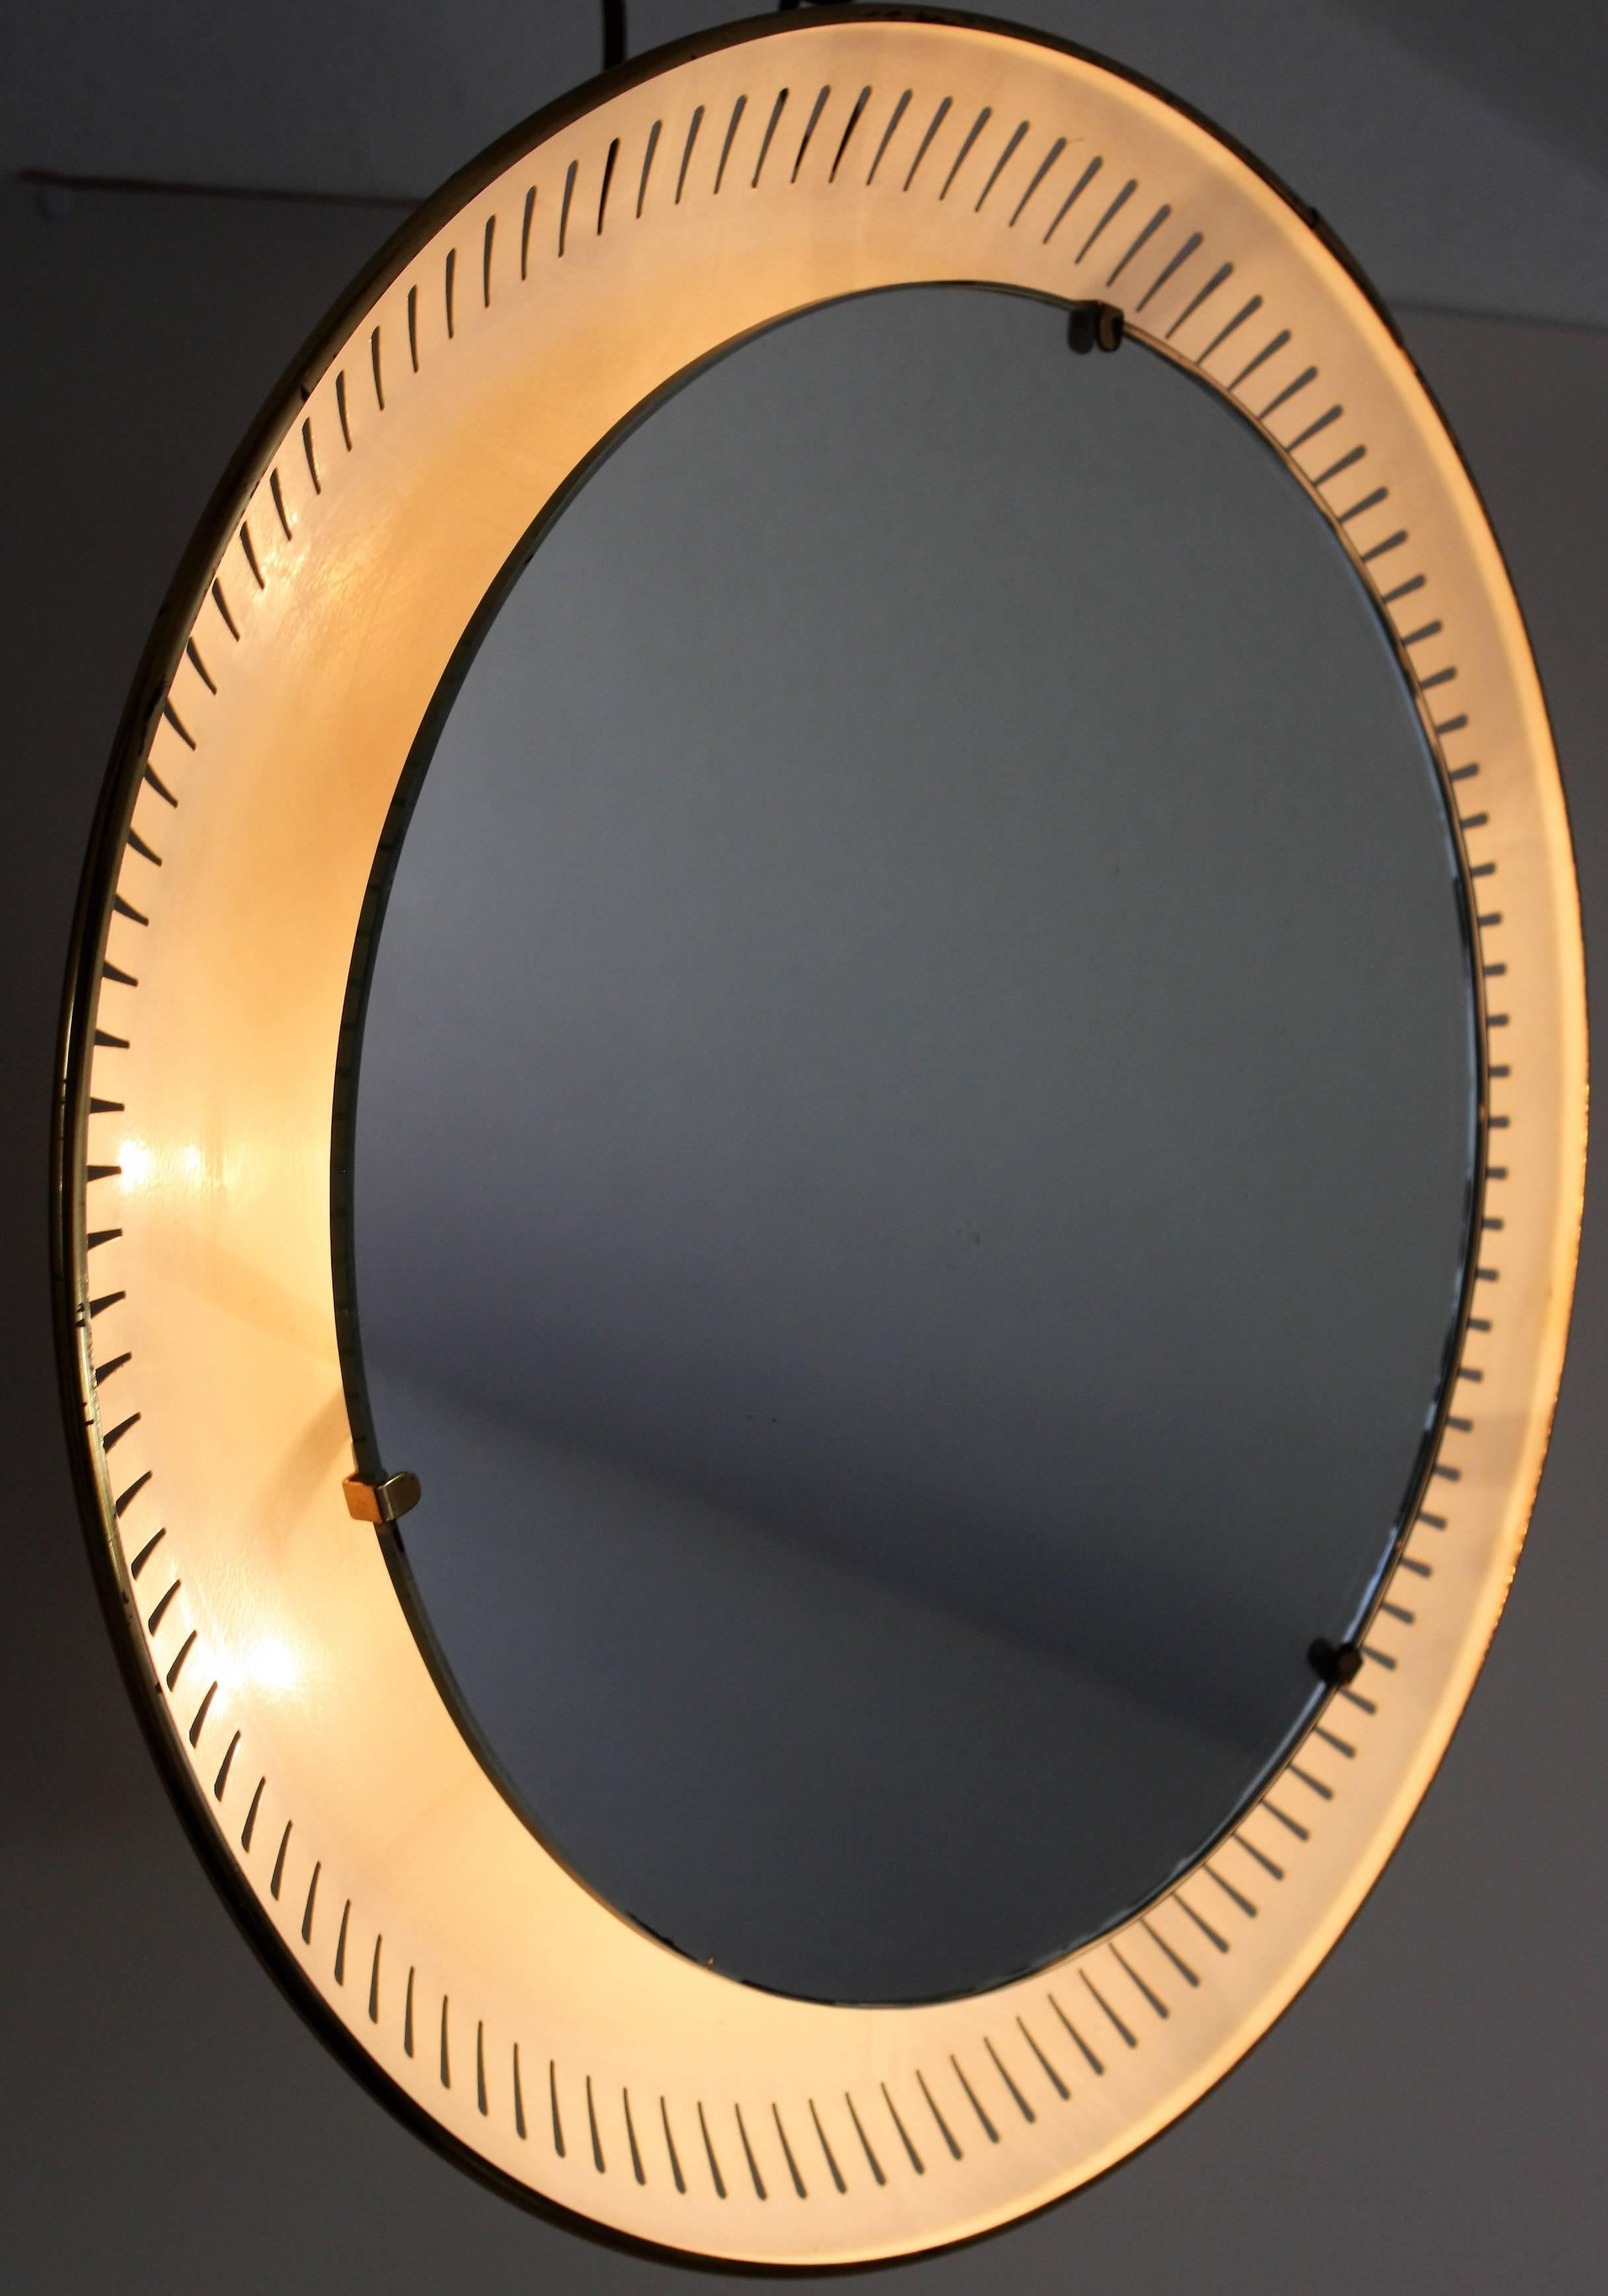 Circular Mid-Century mirror by Stilnovo, Italy, circa 1950s.
With four-lights inside.
Laquered metal frame and original mirror glass plate.
Socket: 4 x Edison (e14) for standard screw bulbs.
Good condition.

